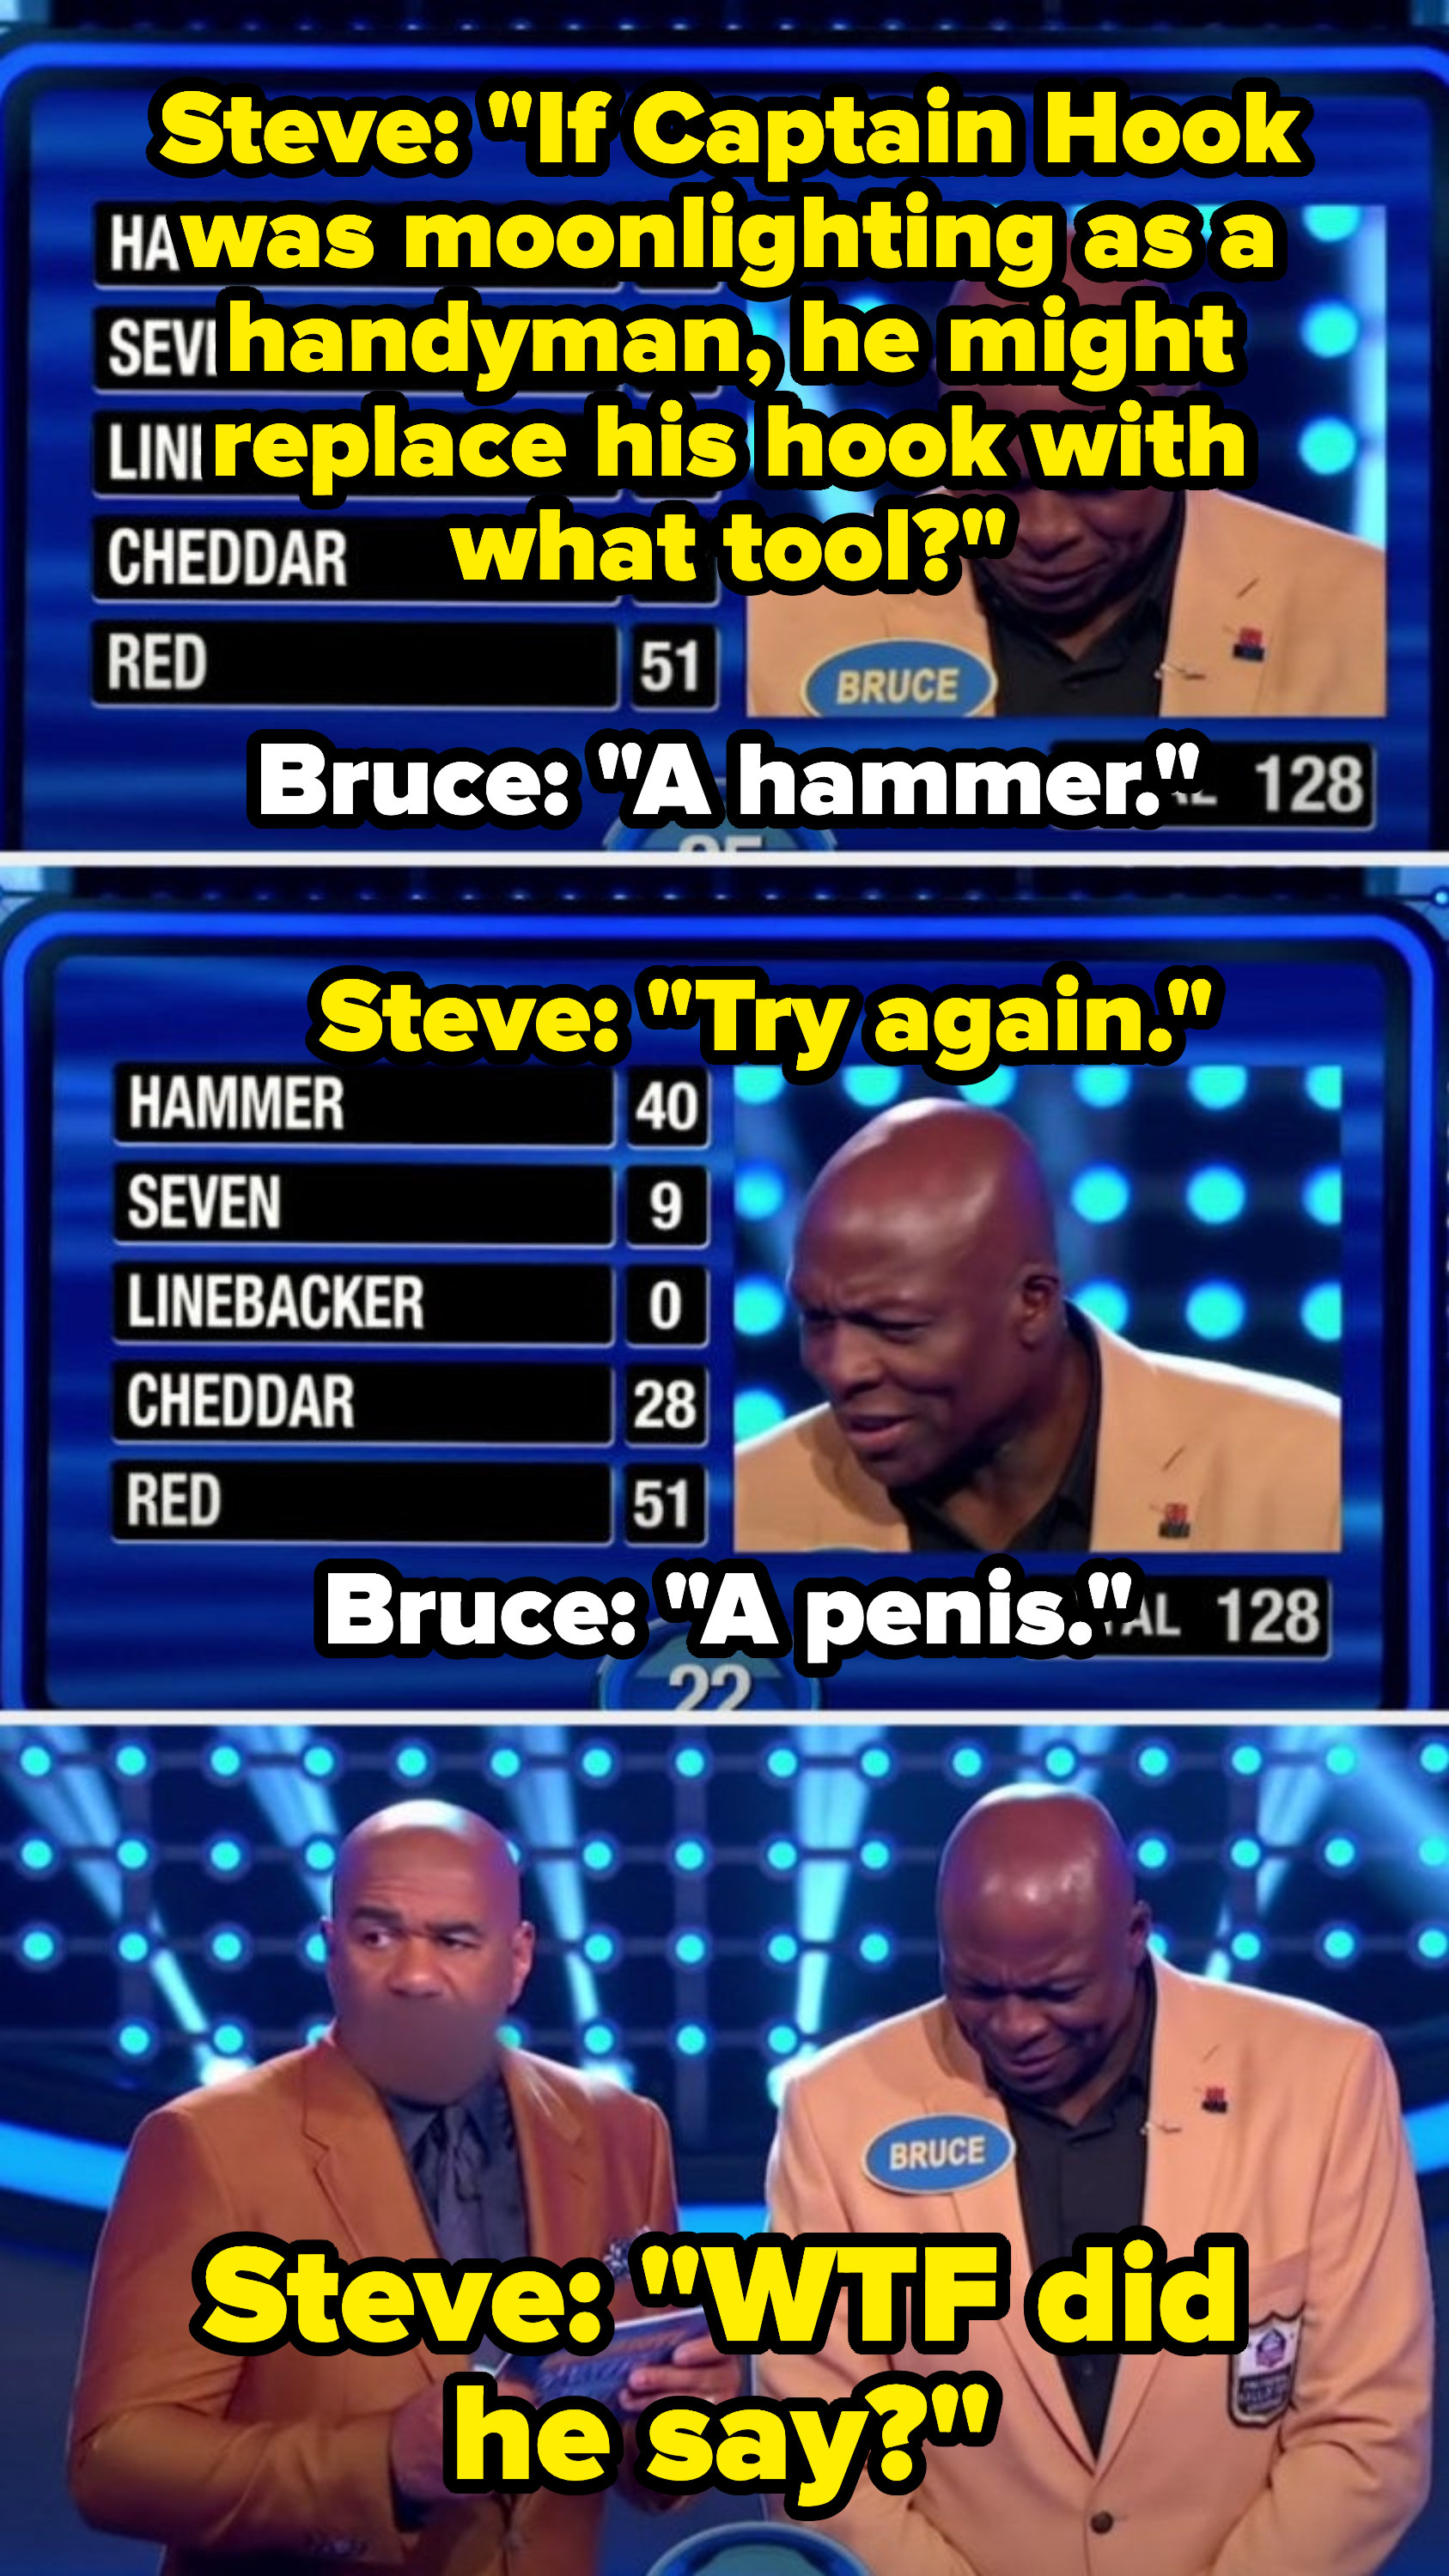 Steve says, &quot;If Captain Hook was moonlighting as a handyman, he might replace his hook with what tool?&quot; and contestant Bruce Smith says, &quot;A hammer&quot; Steve says, &quot;Try again,&quot; to which Bruce replies: &quot;A penis,&quot; and Steve goes, &quot;WTF did he say?&quot;